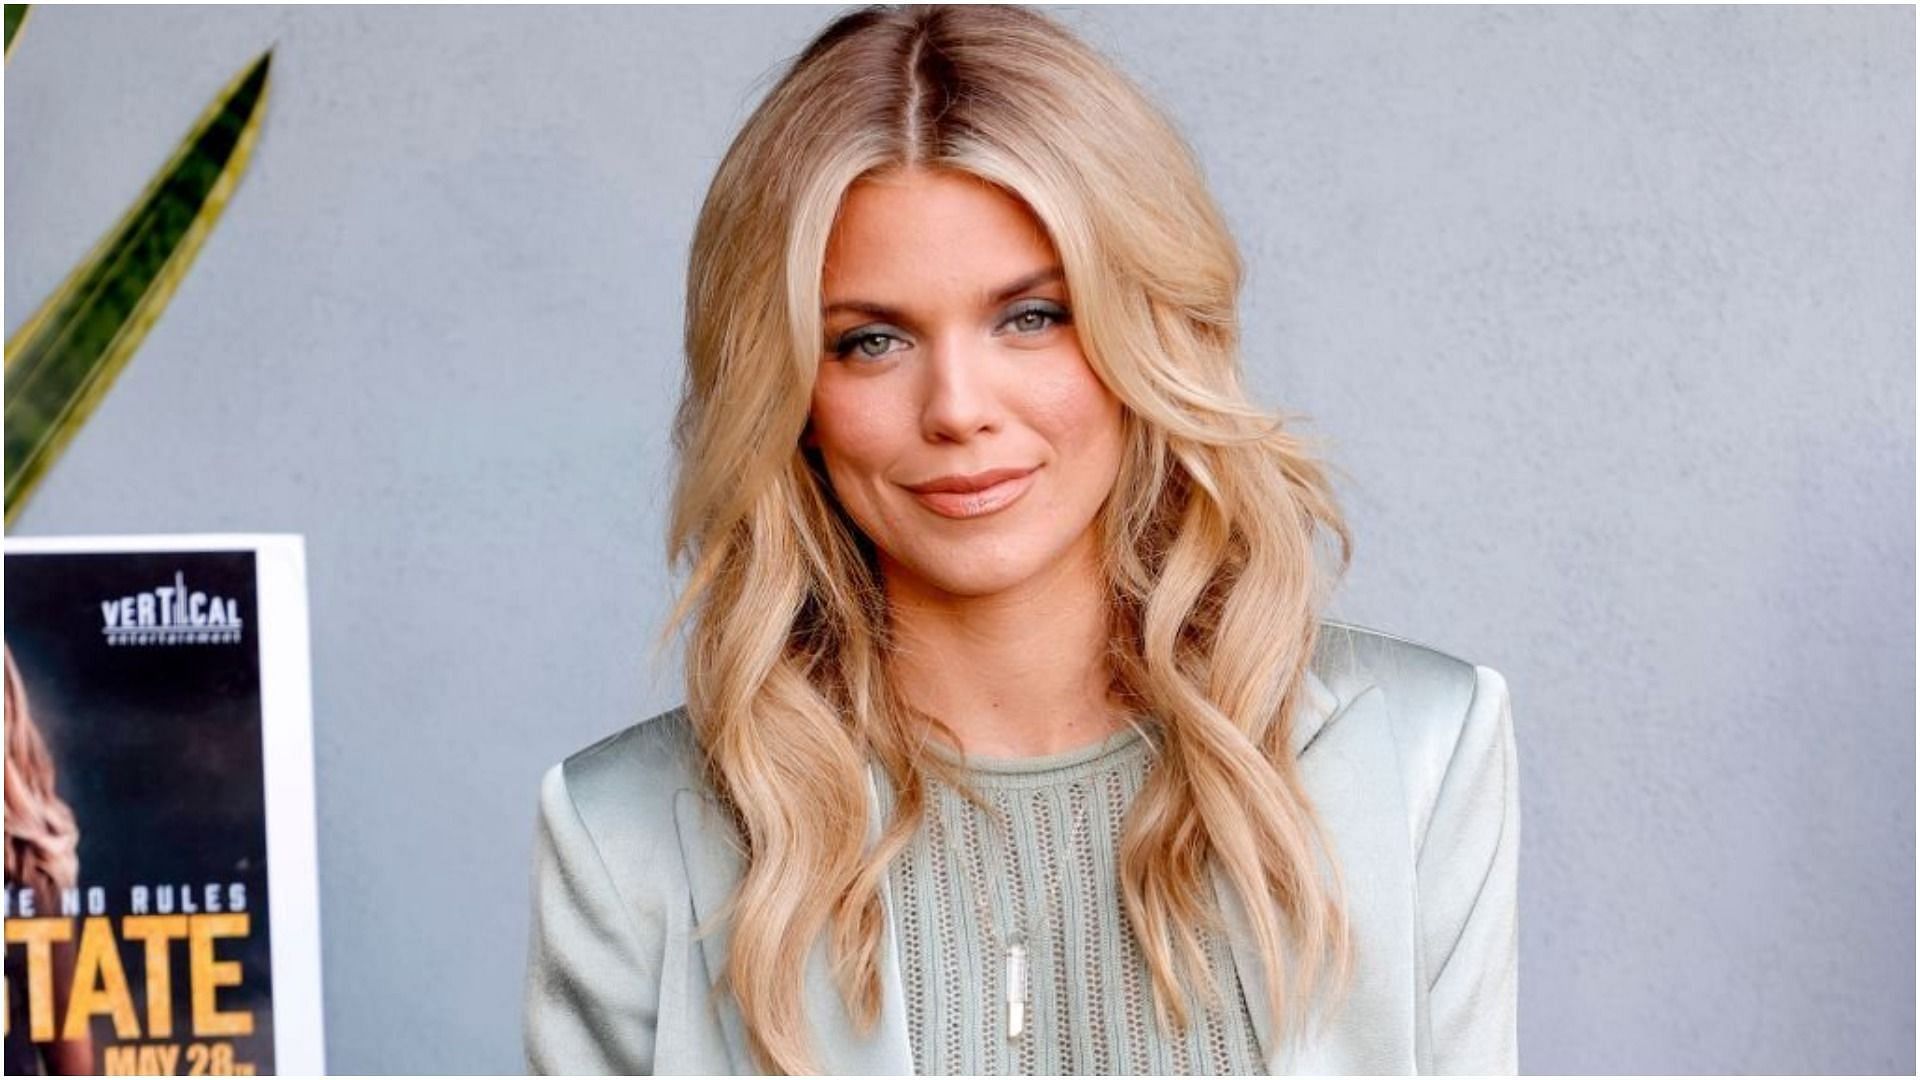 AnnaLynne McCord&#039;s poetry for Vladimir Putin was not loved by the public (Image via Frazer Harrison/Getty Images)